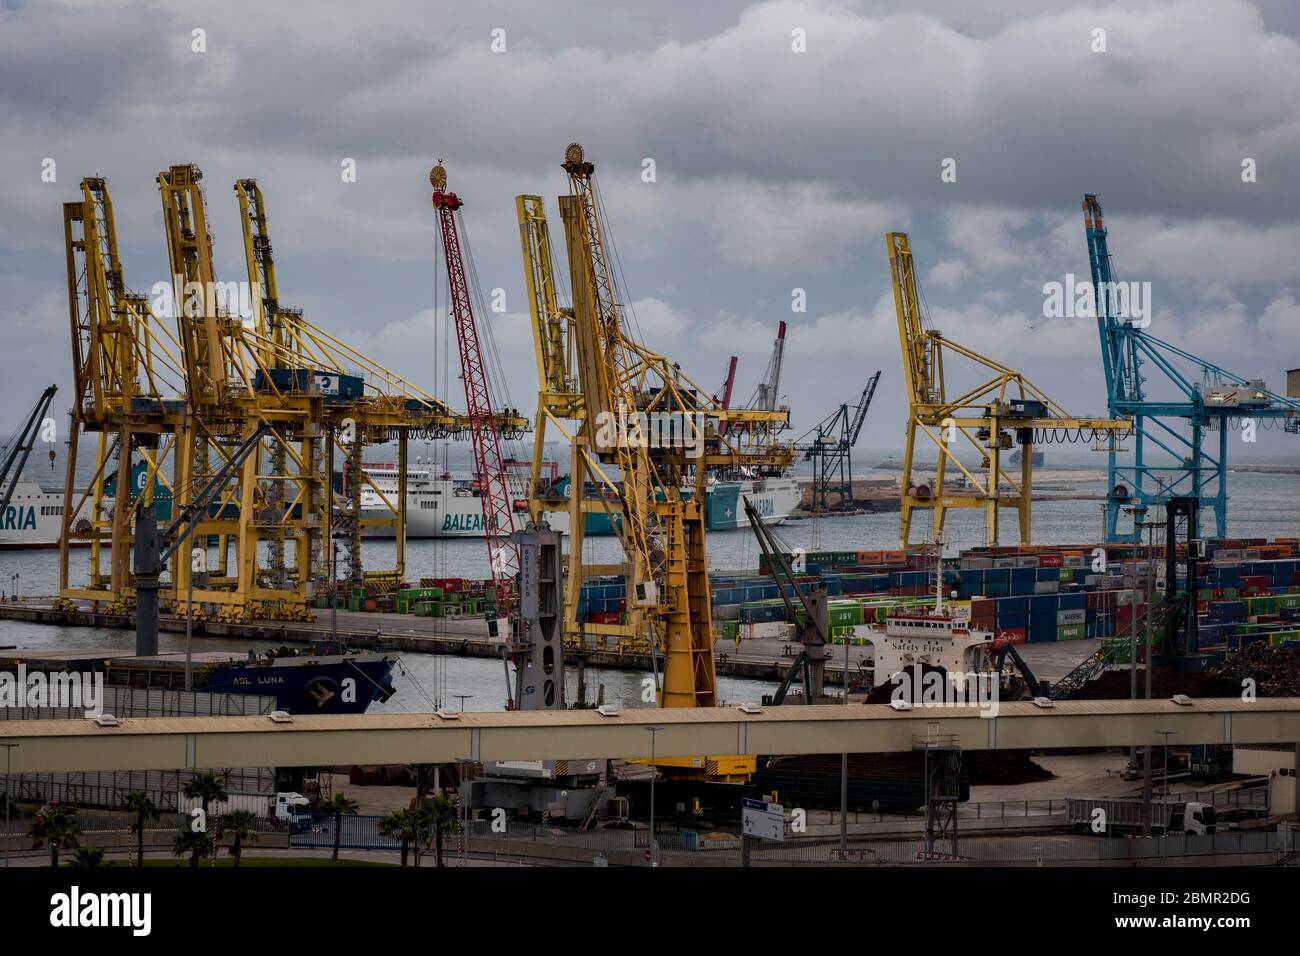 Barcelona, Spain. 10th May, 2020. May 10, 2020, Barcelona, Catalonia, Spain - Container cranes at logistics and industrial area of La Zona Franca in Barcelona. IMF forecasts 8 percent economic contraction in Spain due to coronavirus crisis. The unemployment rate could soar to nearly 21 percent, according to the organization's ‘World Economic Outlook' report of April 2020. Credit:Jordi Boixareu/Alamy Live News Stock Photo